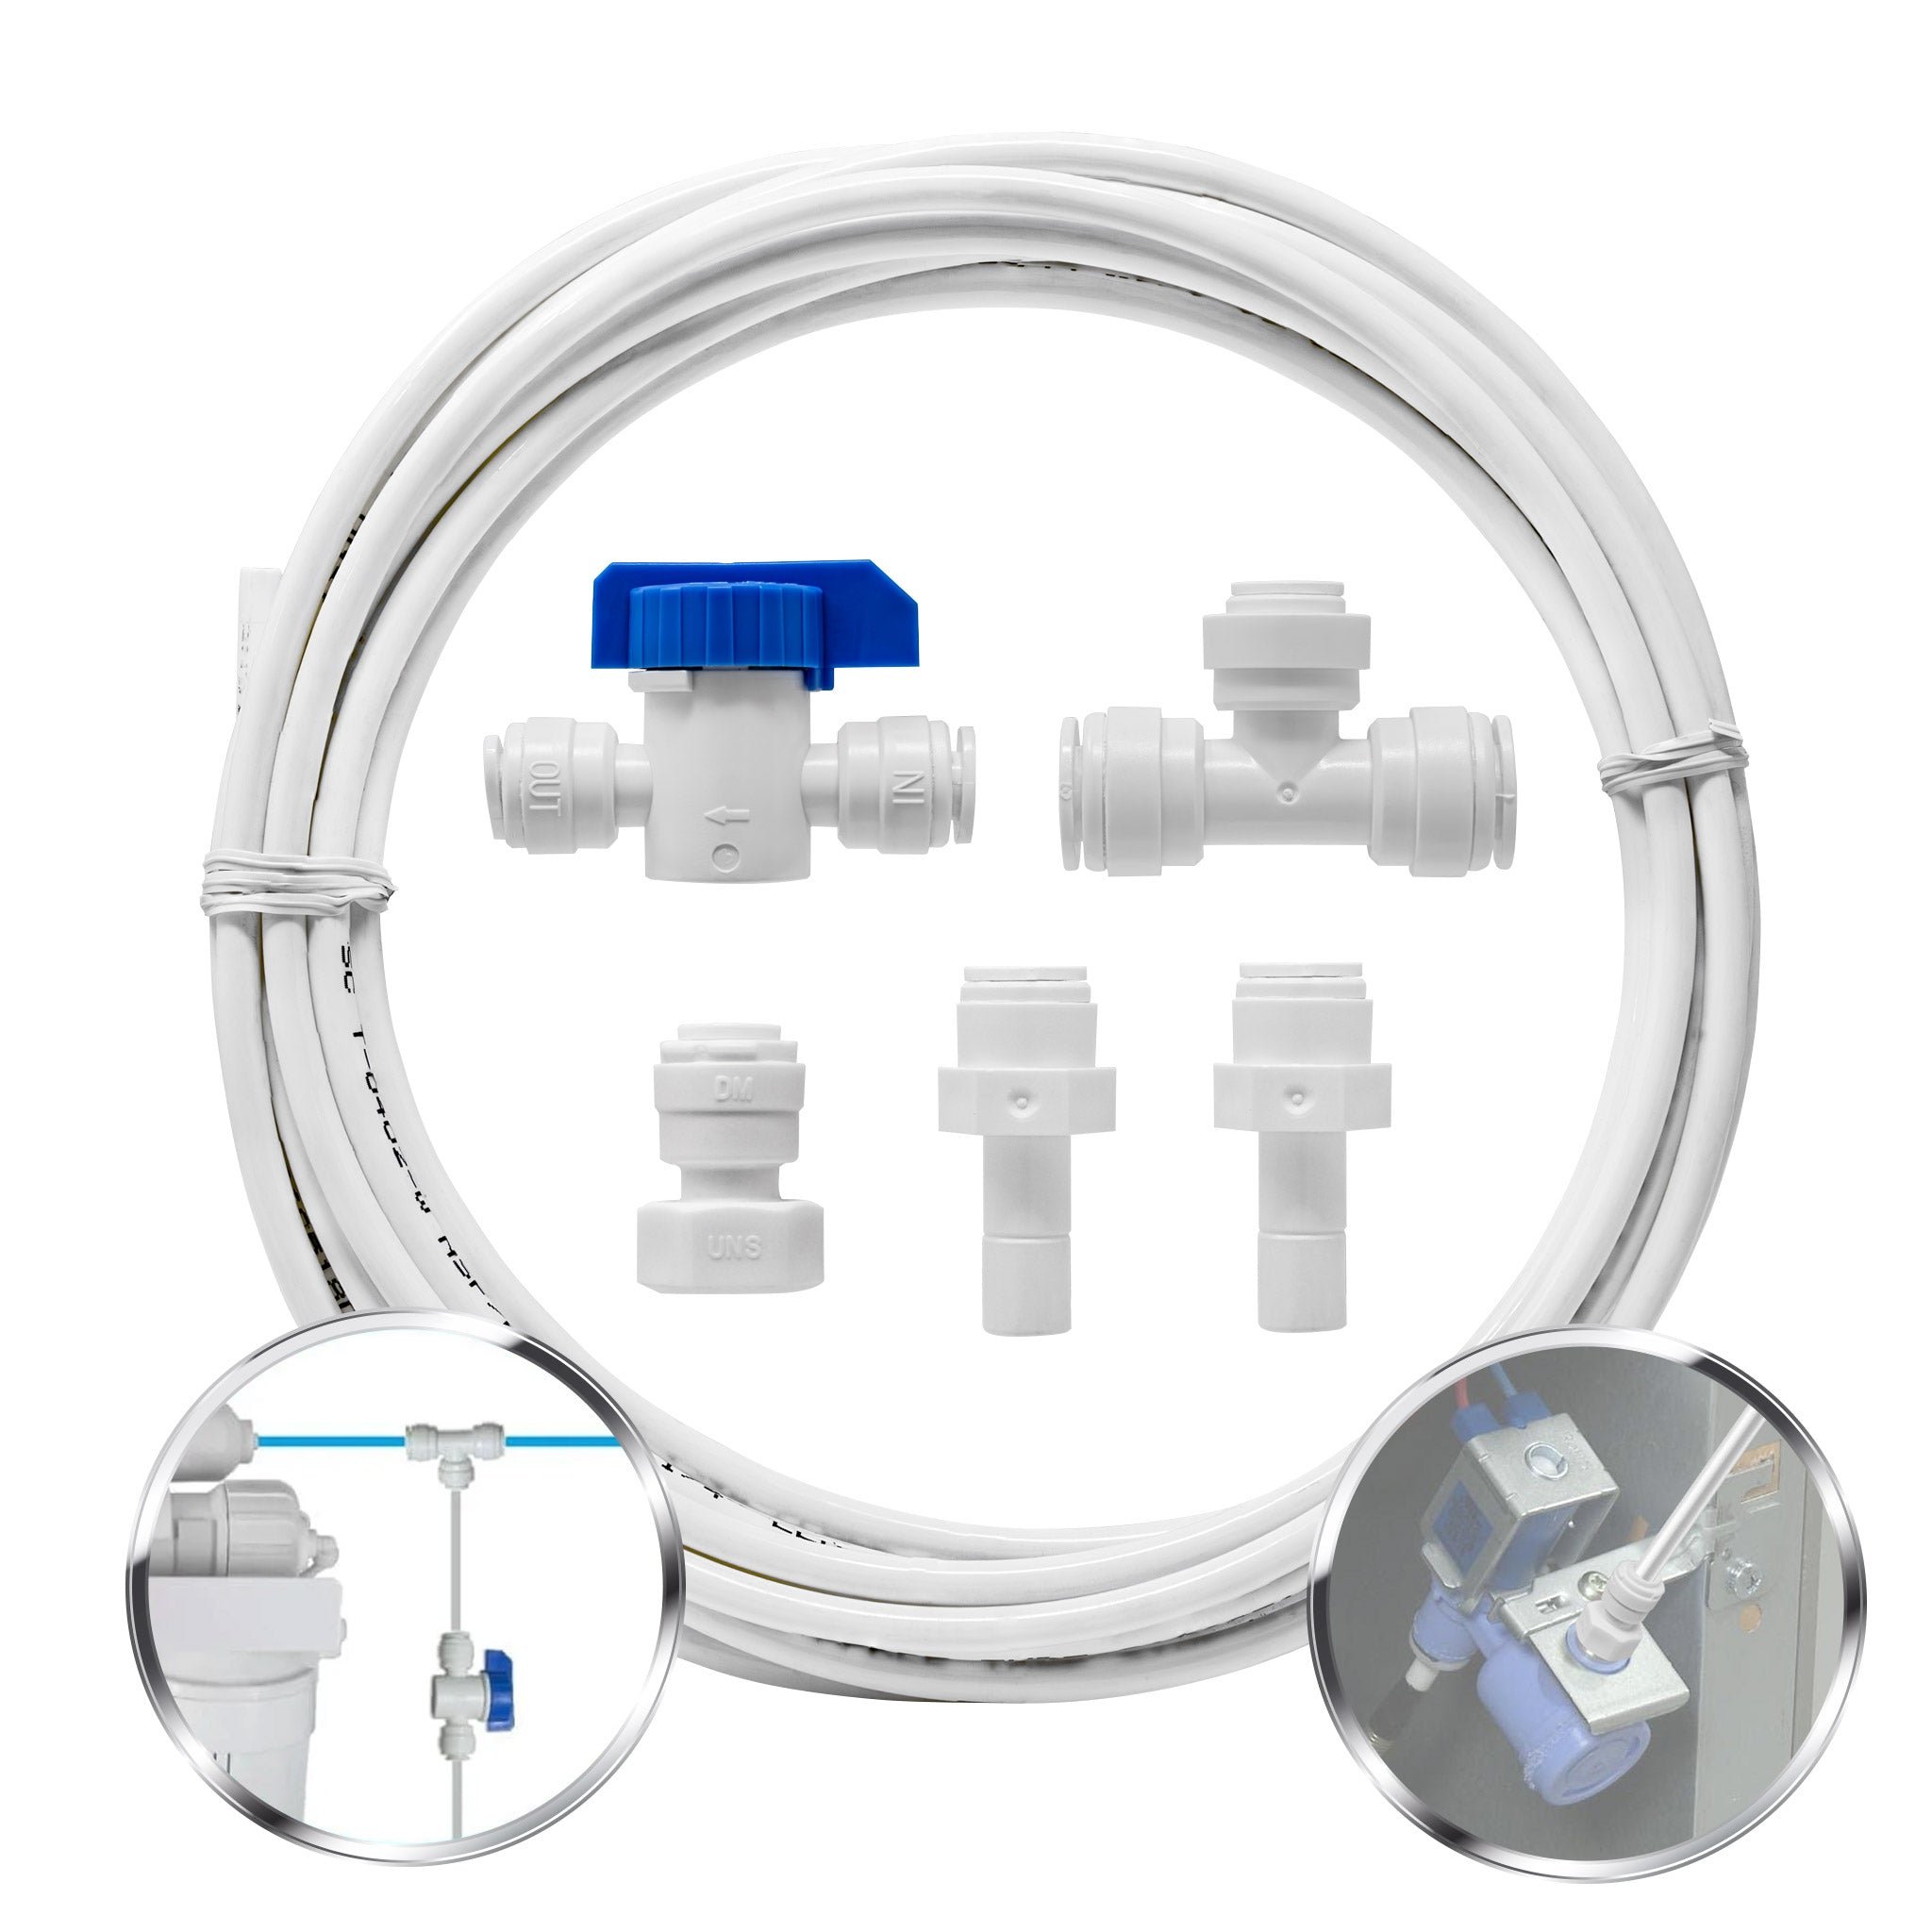 PURENAT Ice Maker Water Line Kit - Food Grade Refrigerator/Fridge Water Tubing Installation Kit1/4 in OD 25 ft Water Line with Quick Fittingsfor Addin